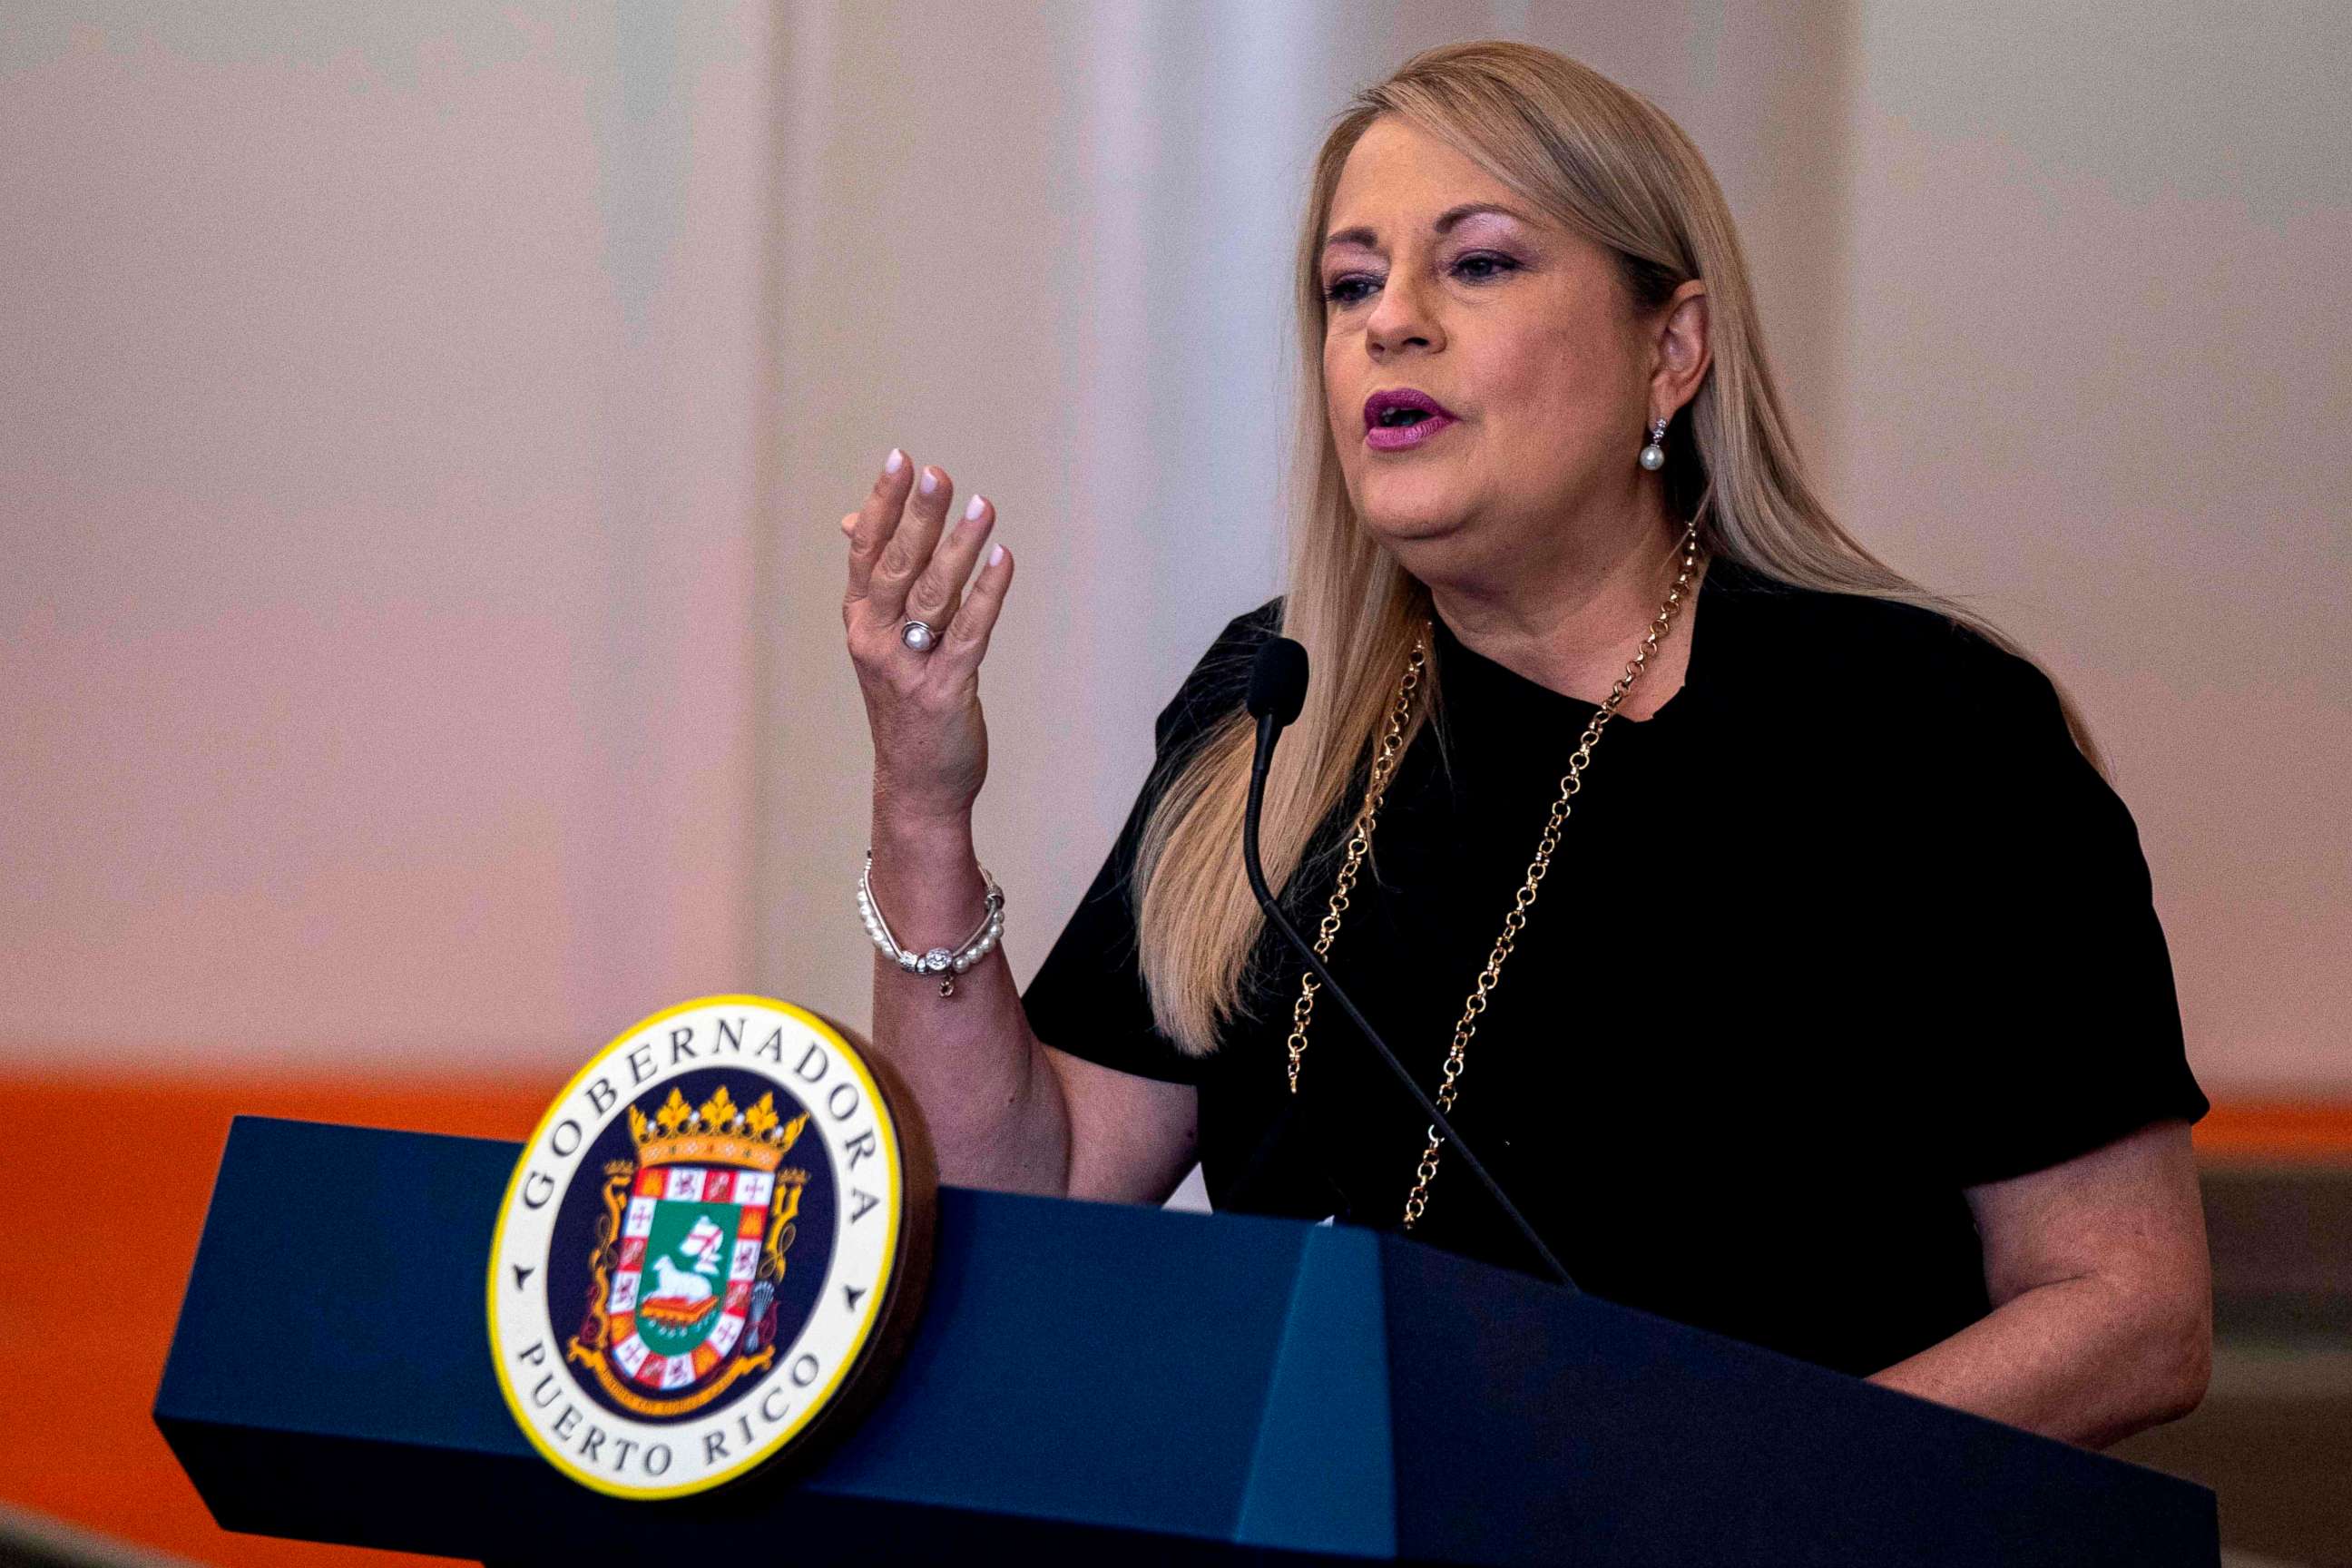 PHOTO: Puerto Rico Governor Wanda Vazquez Garced speaks during a press conference to announce  strict new rules for all passengers flying into Puerto Rico to curb coronavirus cases in San Juan, Puerto Rico, on June 30, 2020.